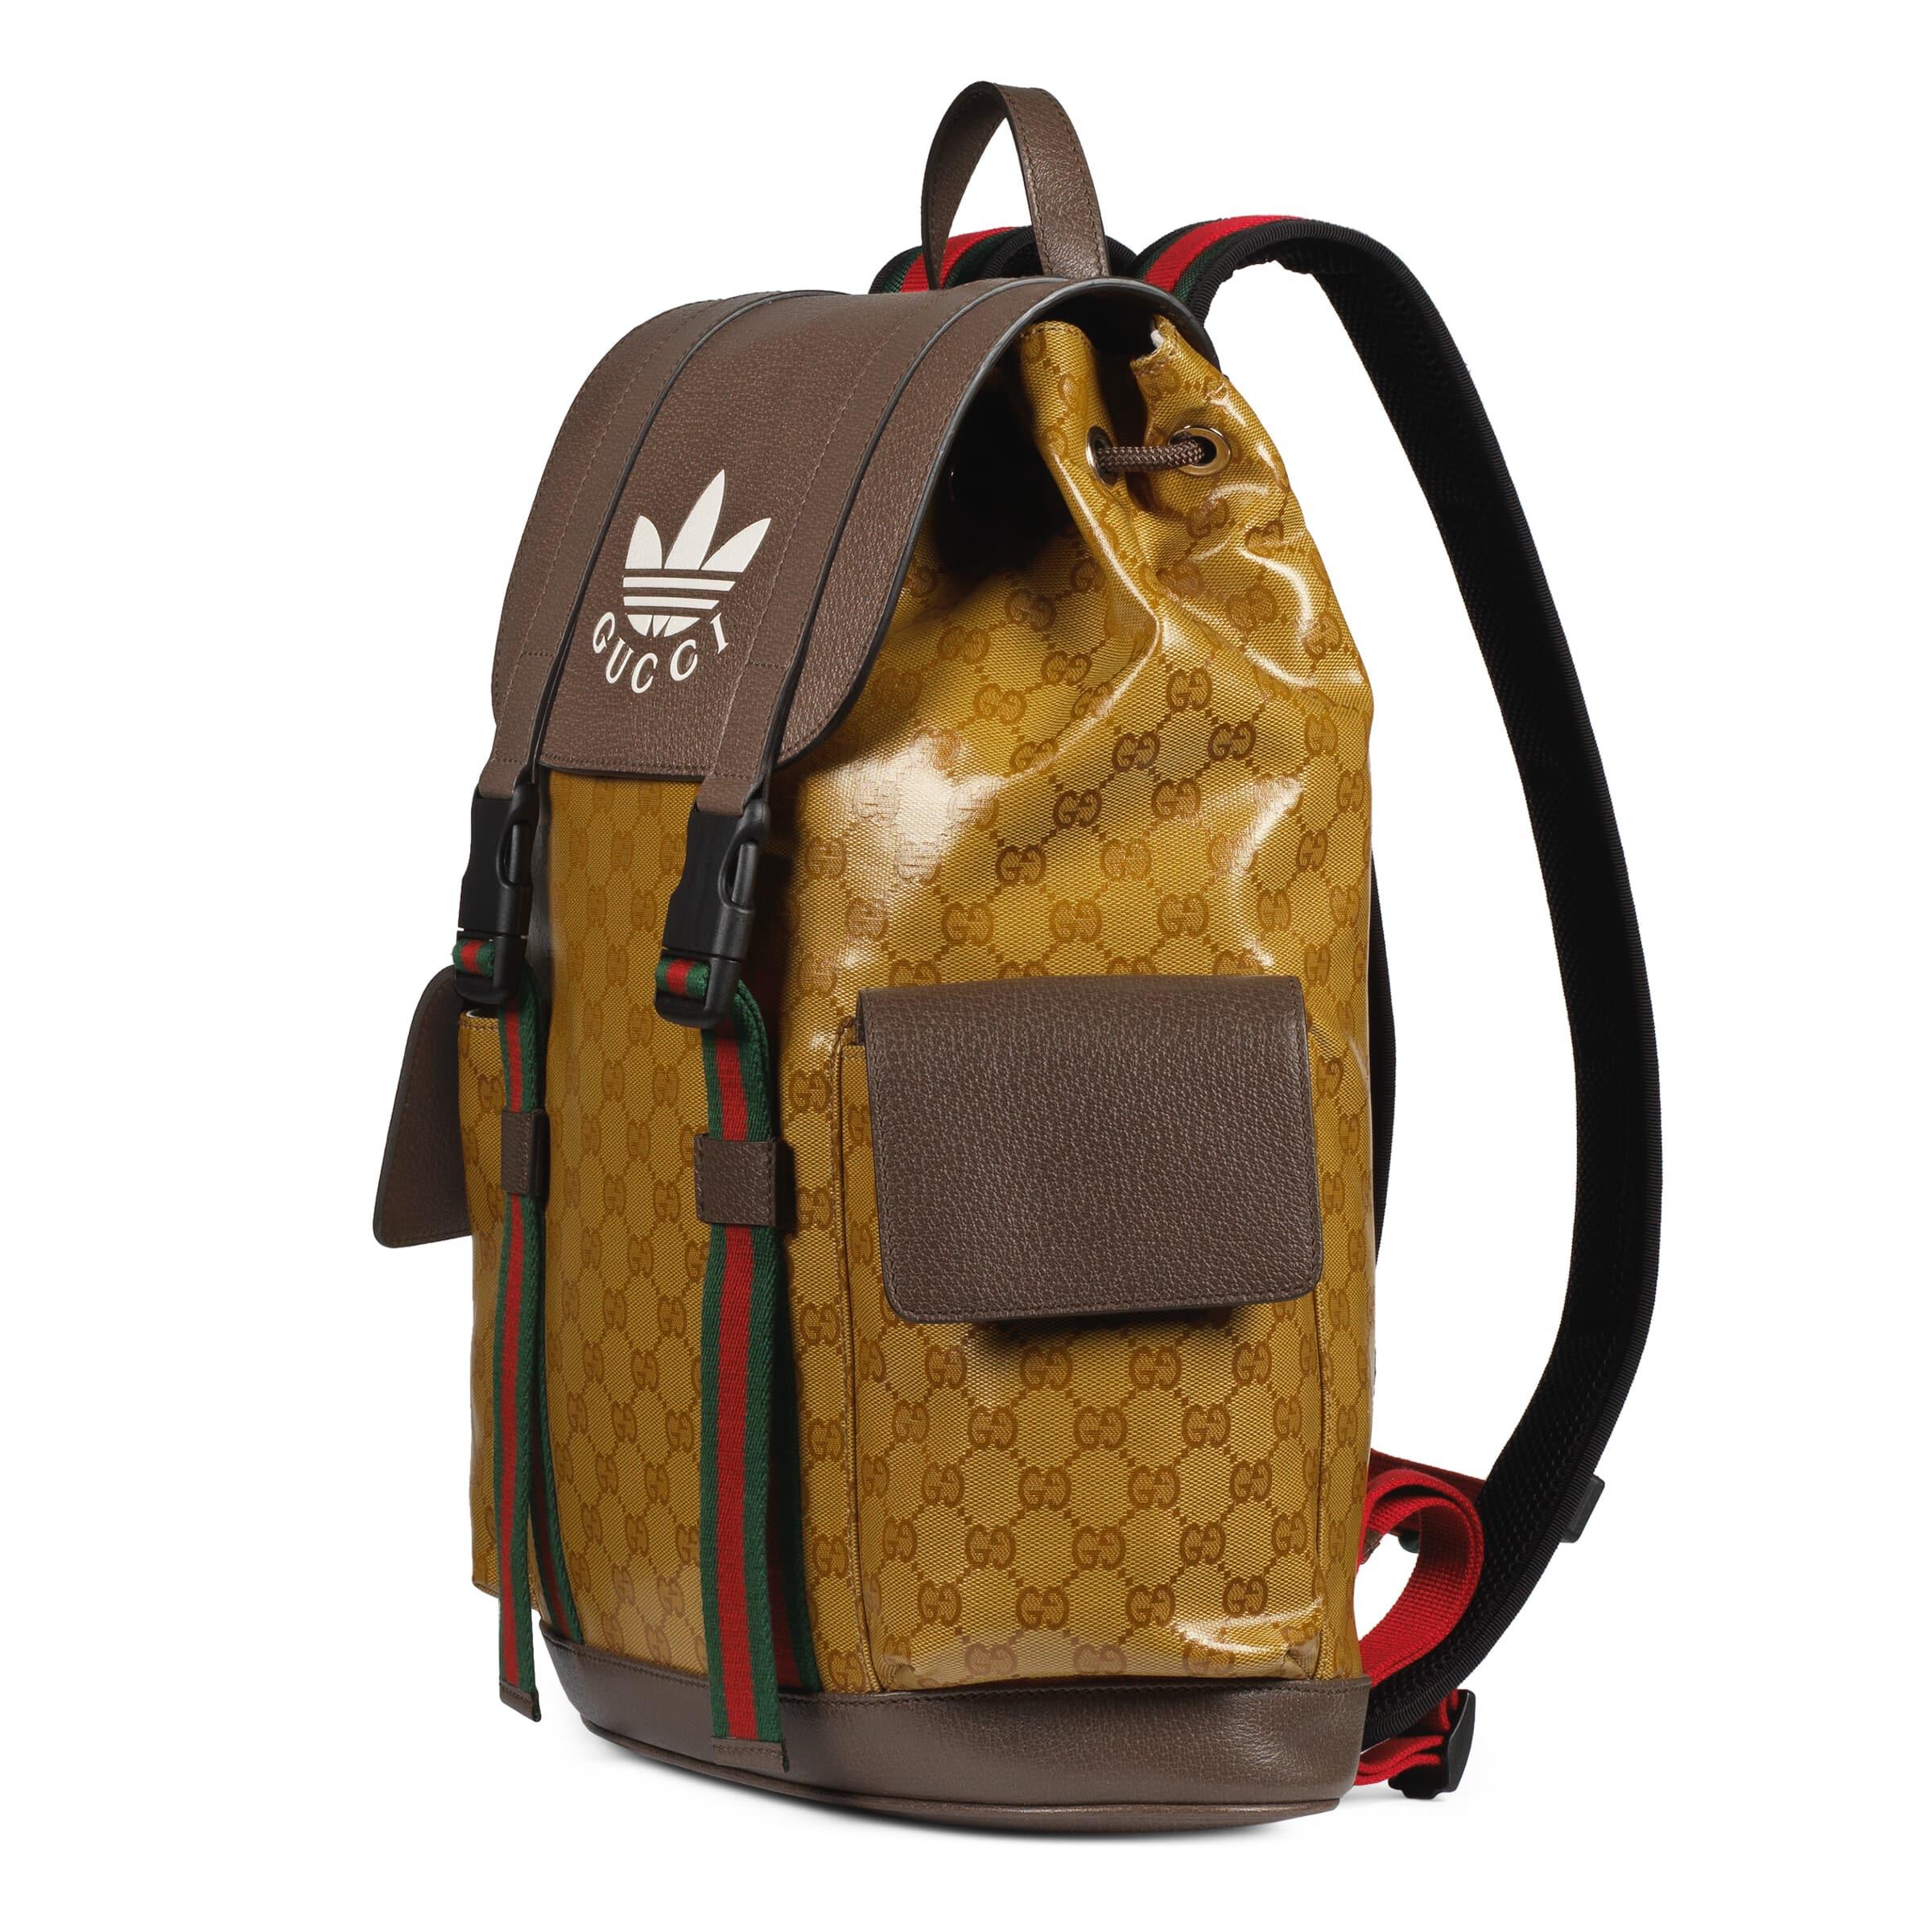 GUCCI GUCCI adidas Collaboration Shoulder crossbody Bag 702427 canvas Brown  Used 702427｜Product Code：2100301064447｜BRAND OFF Online Store